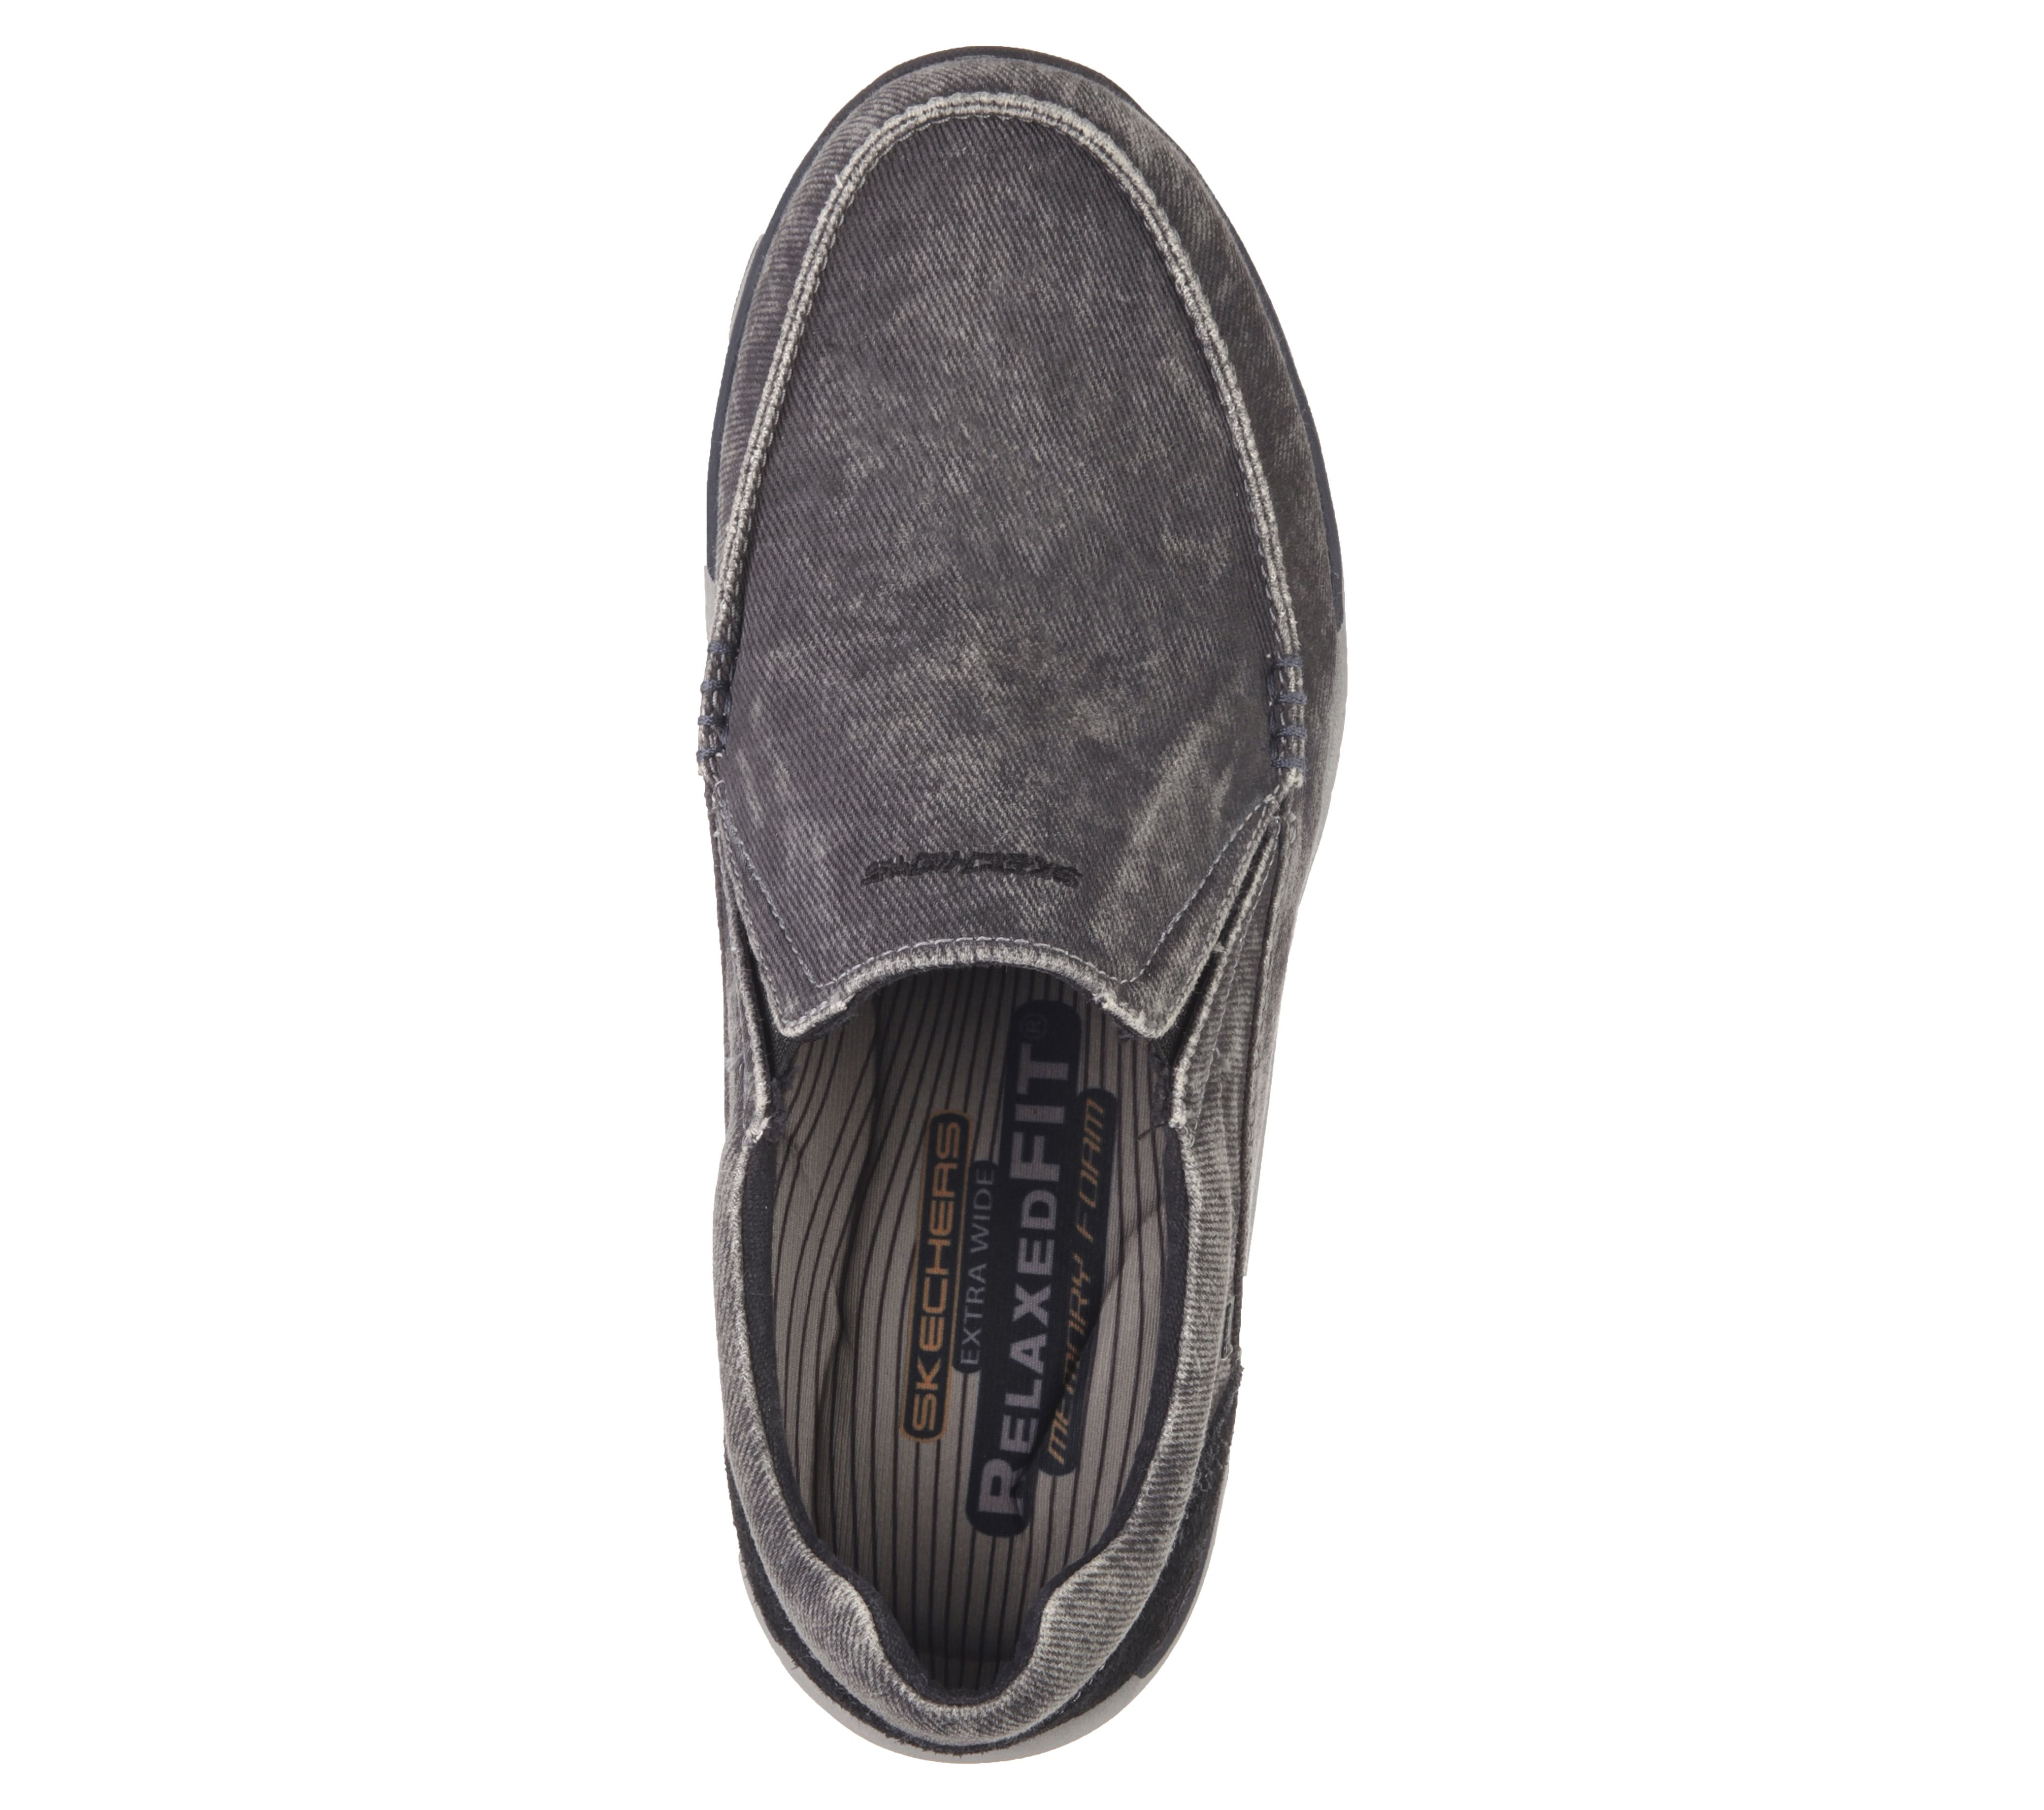 Skechers Men's Relaxed Fit Expected Avillo Casual Slip-on Shoe (Wide Width Available) - image 3 of 7